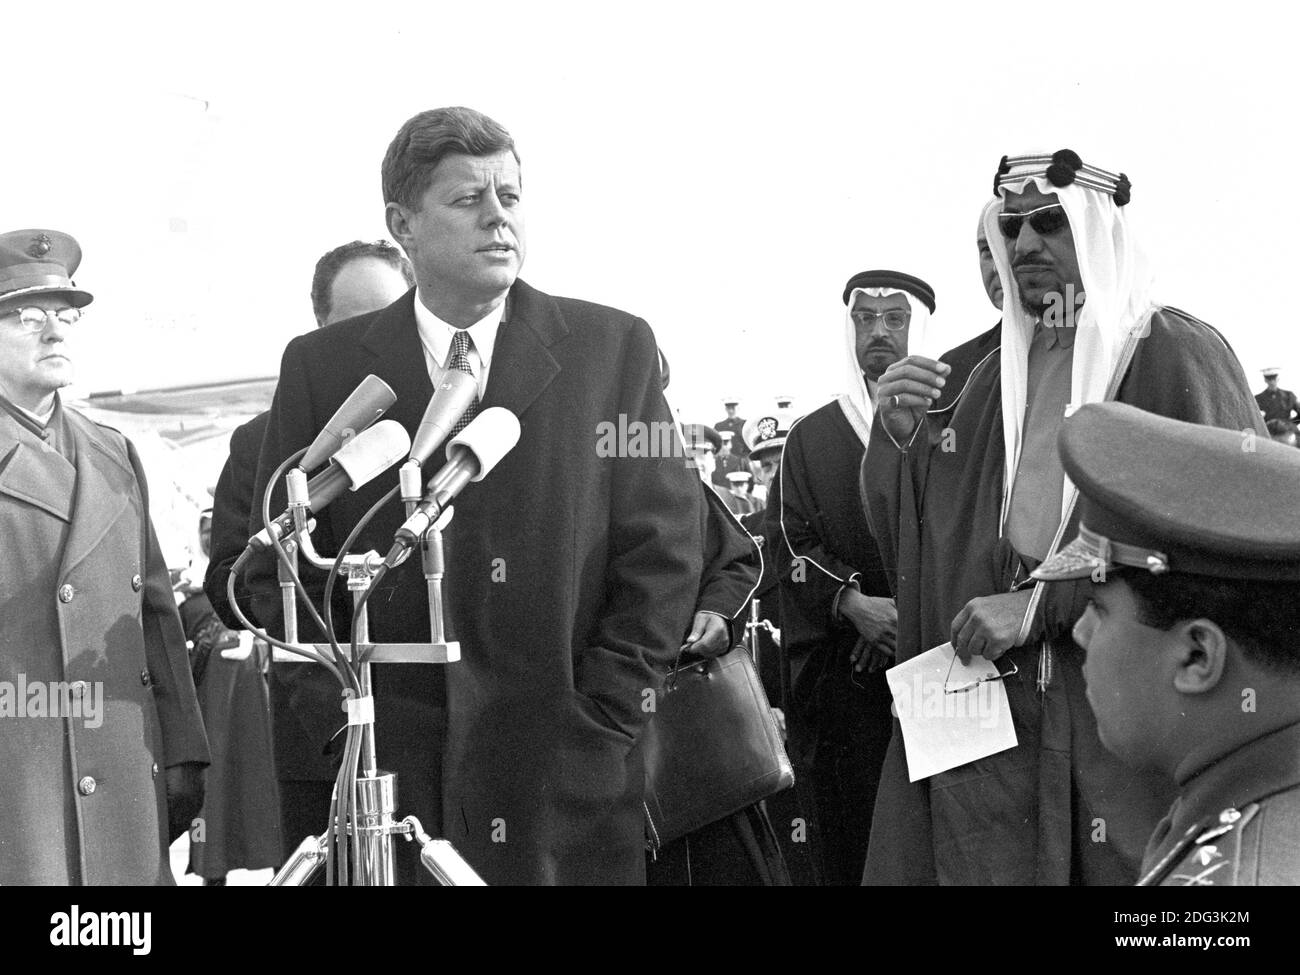 United States President John F. Kennedy welcomes a delegation led by King Saud bin Abdulaziz Al Saud of Saudi Arabia during a ceremony at Andrews Air Force Base, Maryland on February 13, 1962. Photo by Arnie Sachs / CNP /ABACAPRESS.COM Stock Photo